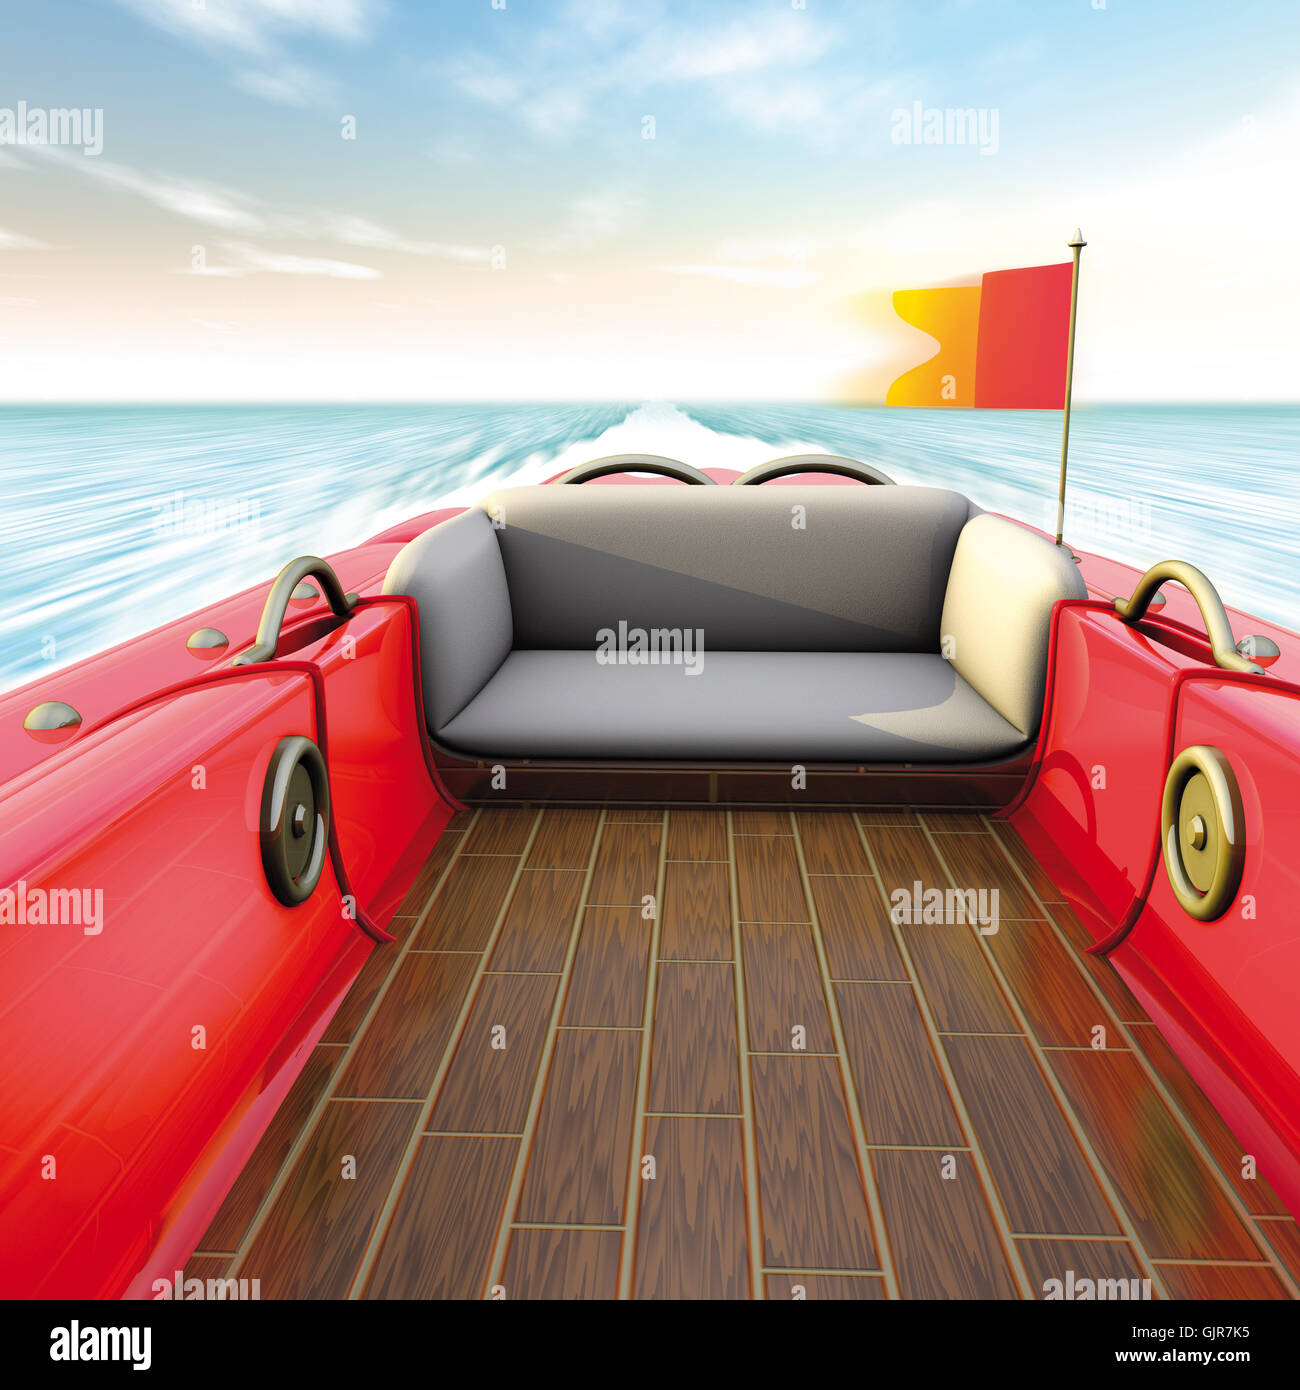 Motor Yacht interiors Banque D'Images